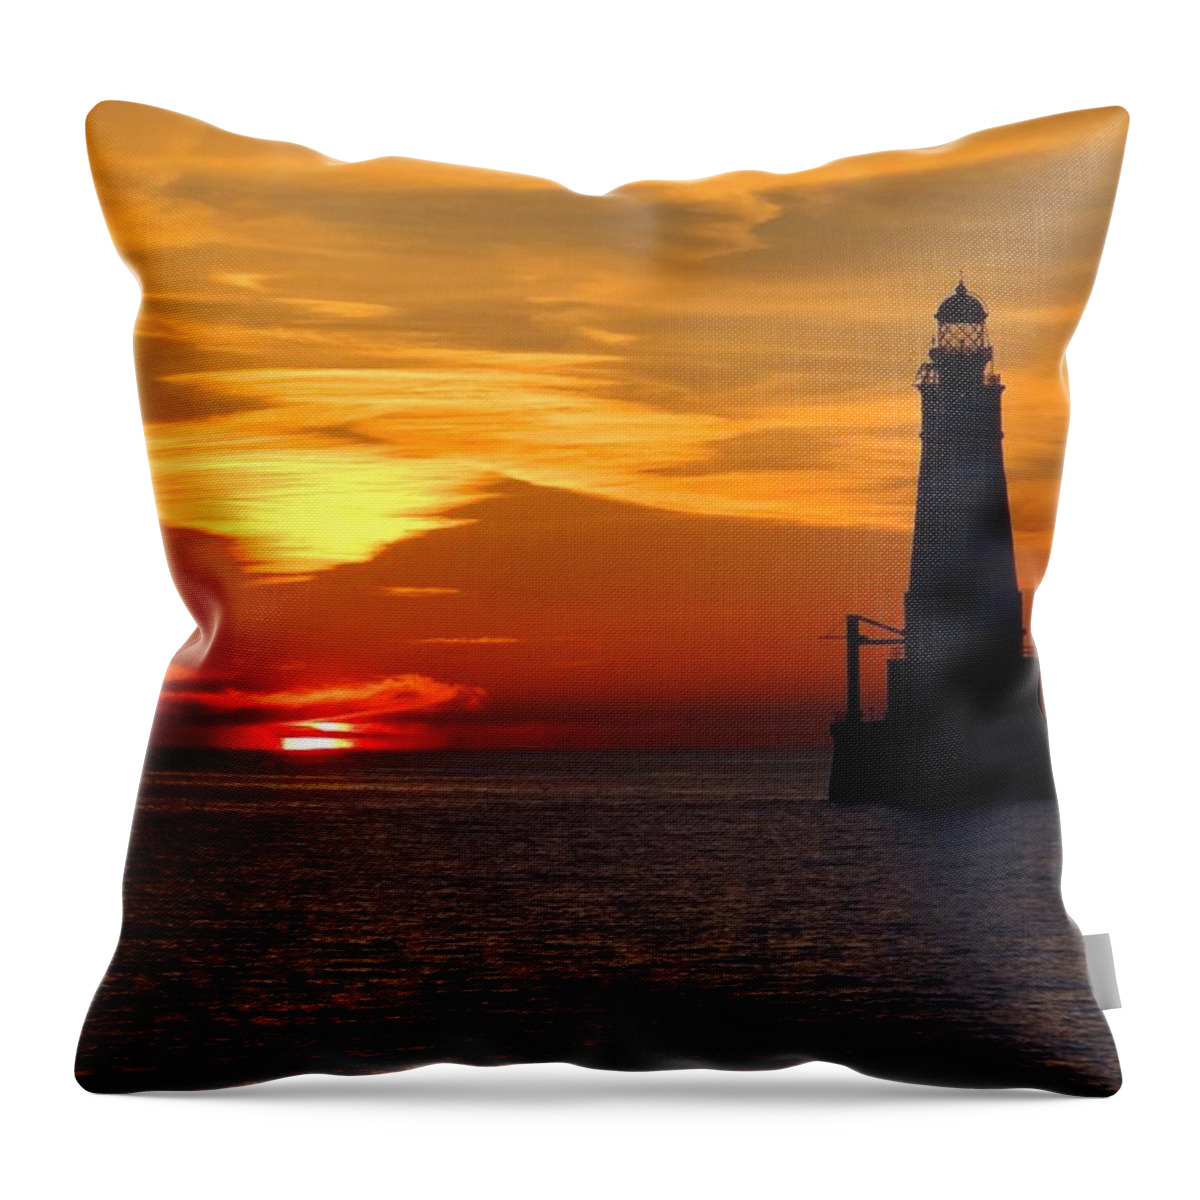 Lighthouse Throw Pillow featuring the photograph White Shoal Light by Keith Stokes